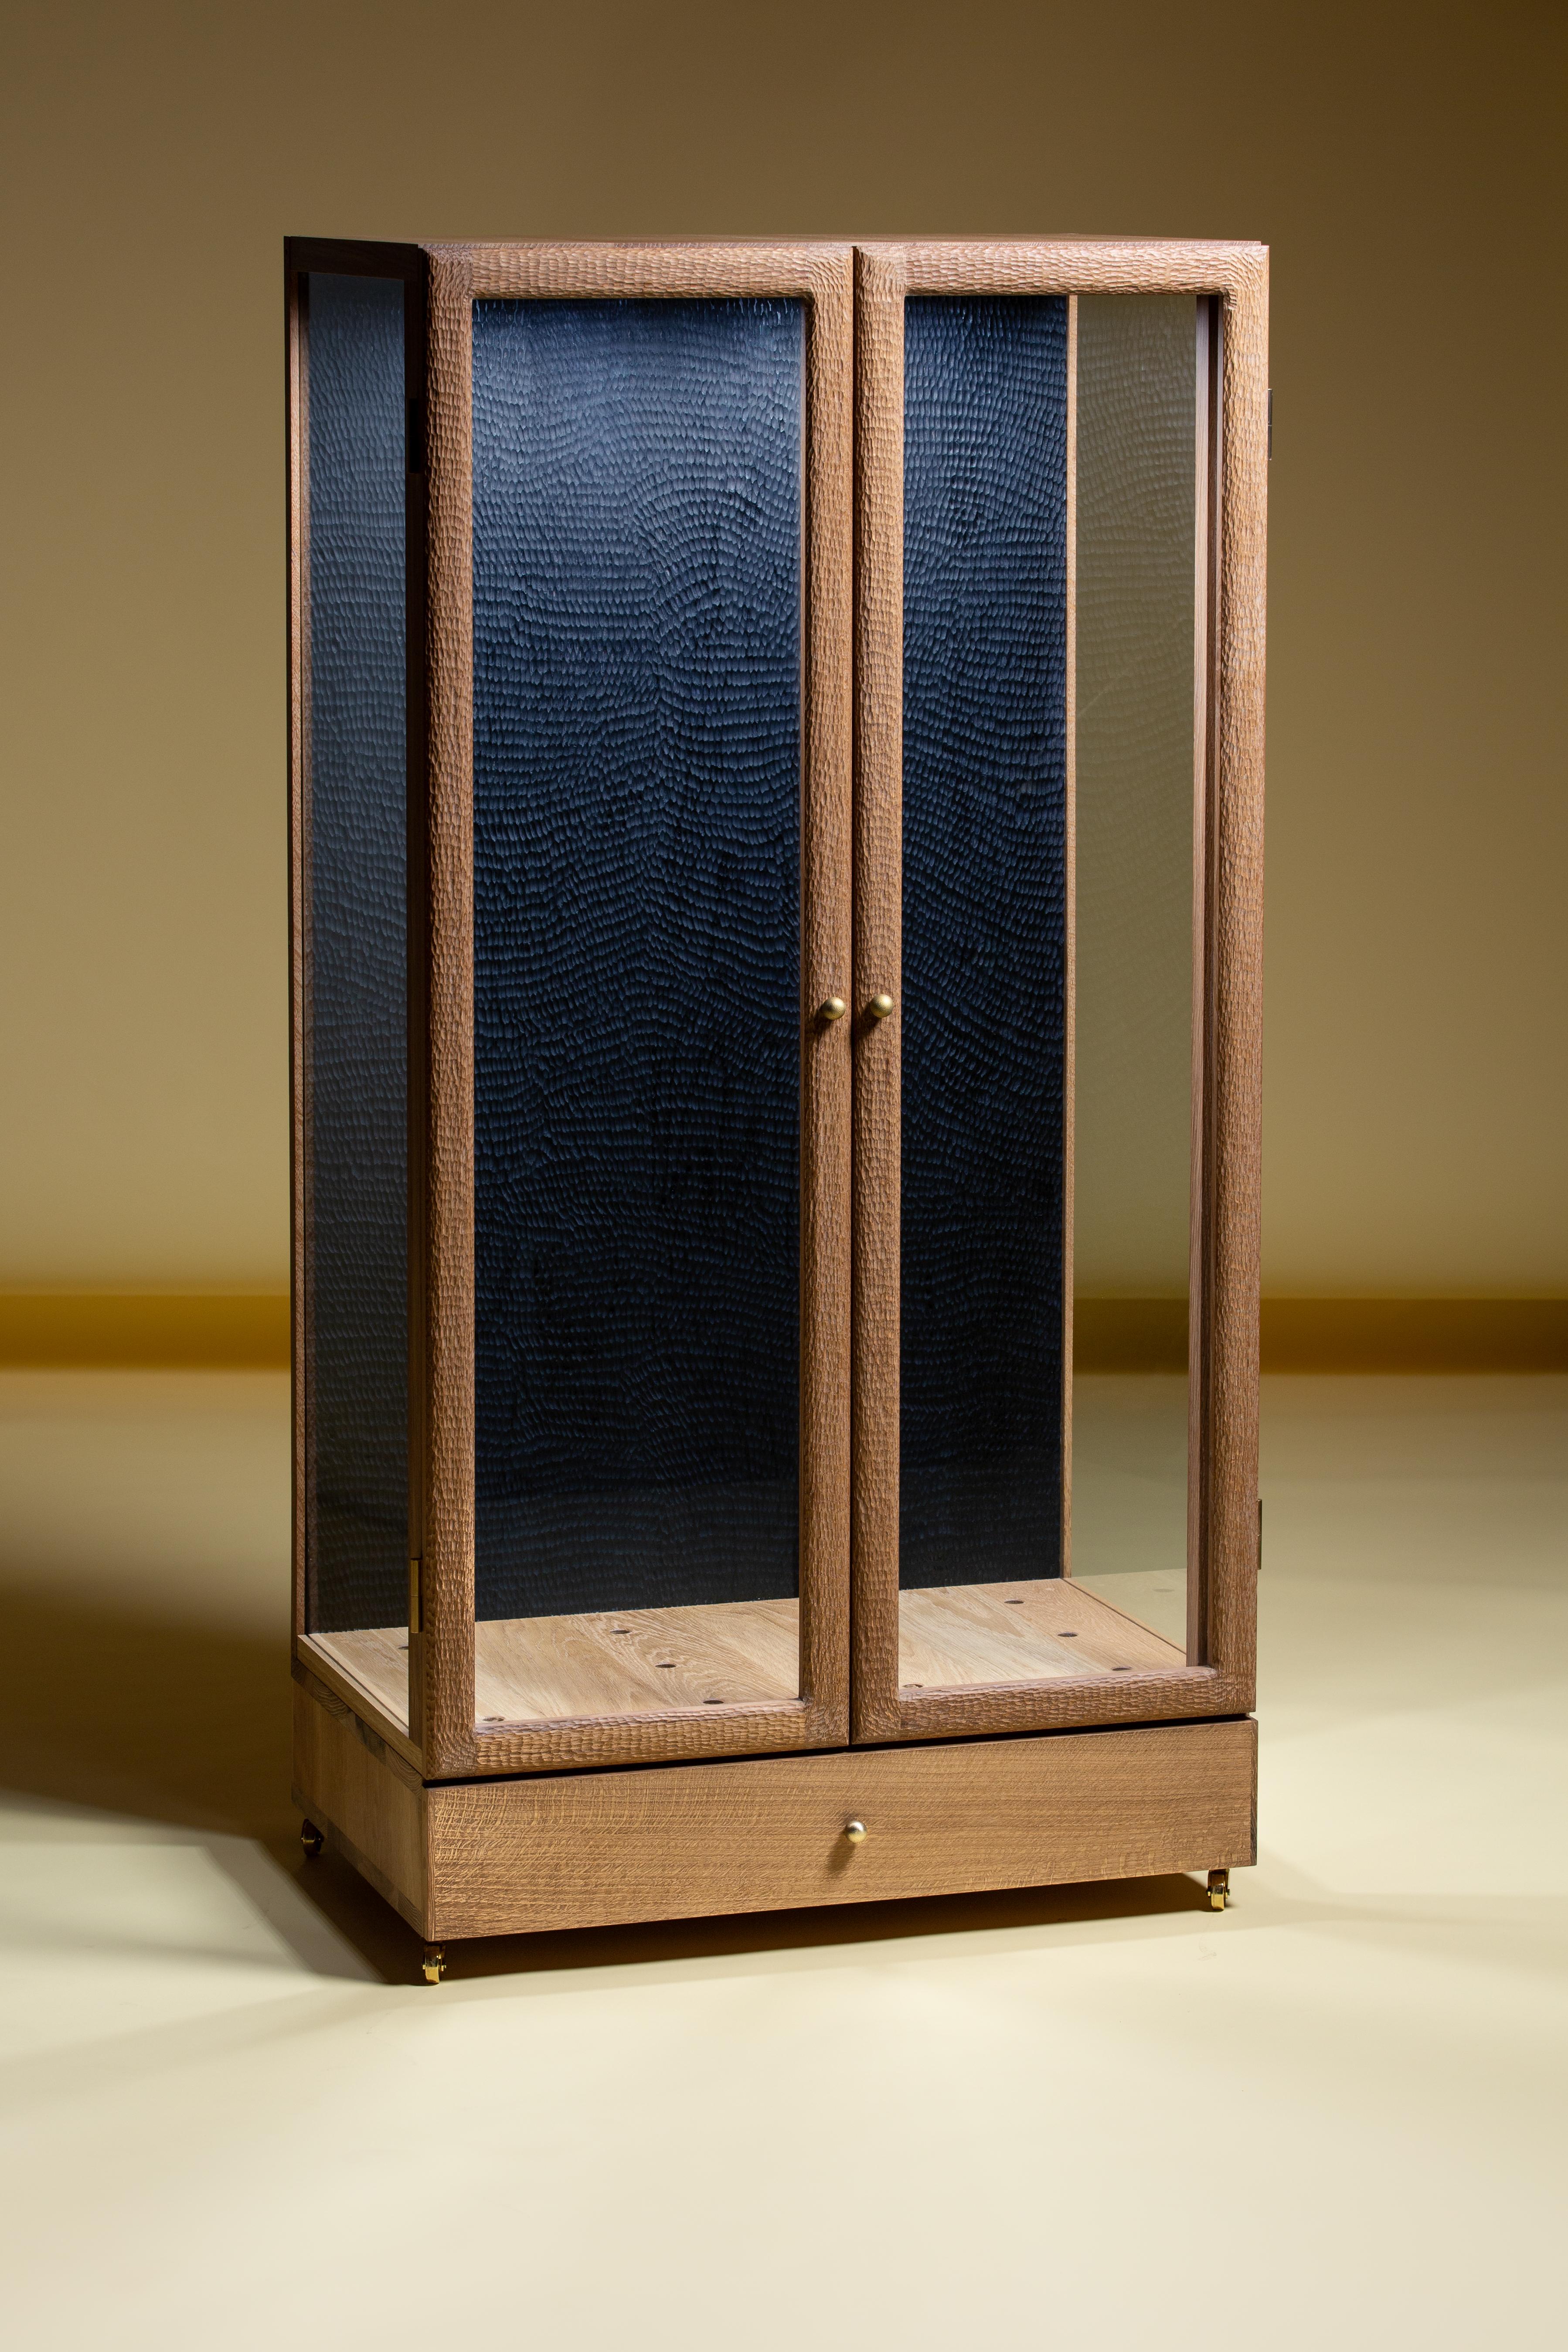 Dylan Moore Studio's white oak guitar cabinets are exquisite pieces of craftsmanship that combine traditional solid wood cabinet-making techniques with unique handcrafted details and finishes. These cabinets are designed to showcase and protect